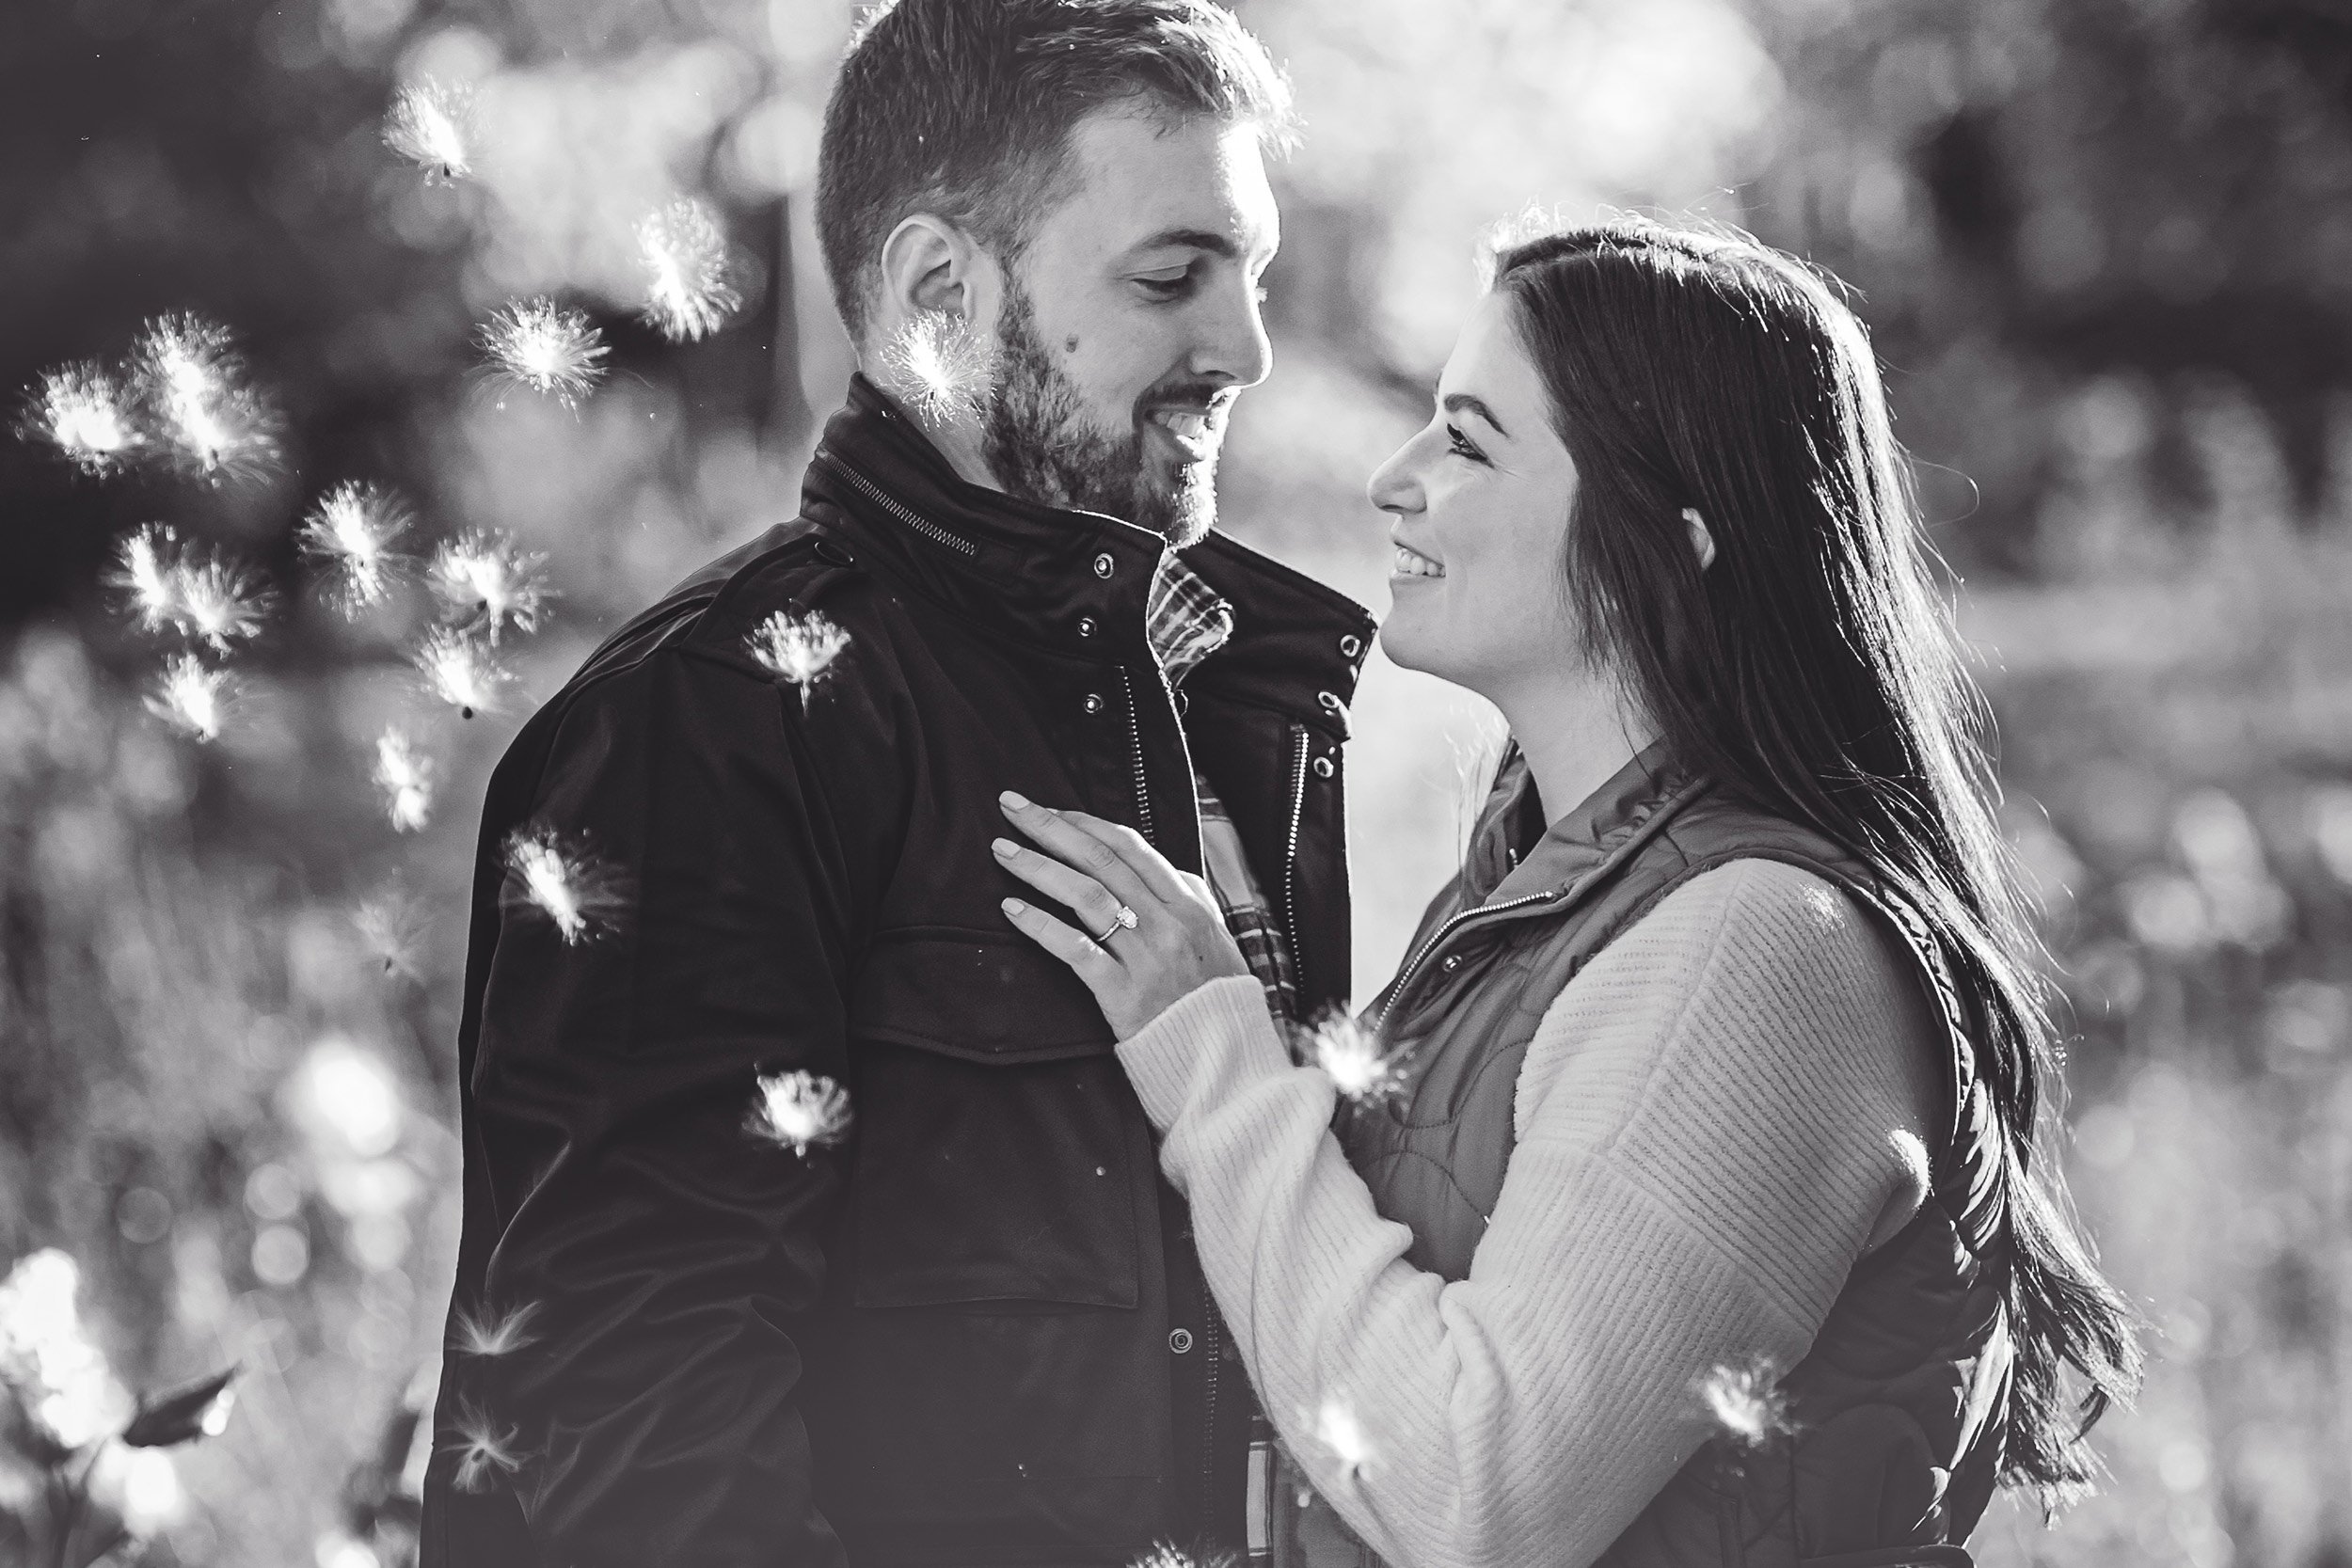 North Reading Engagement Proposal Photographer - Stephen Grant Photography